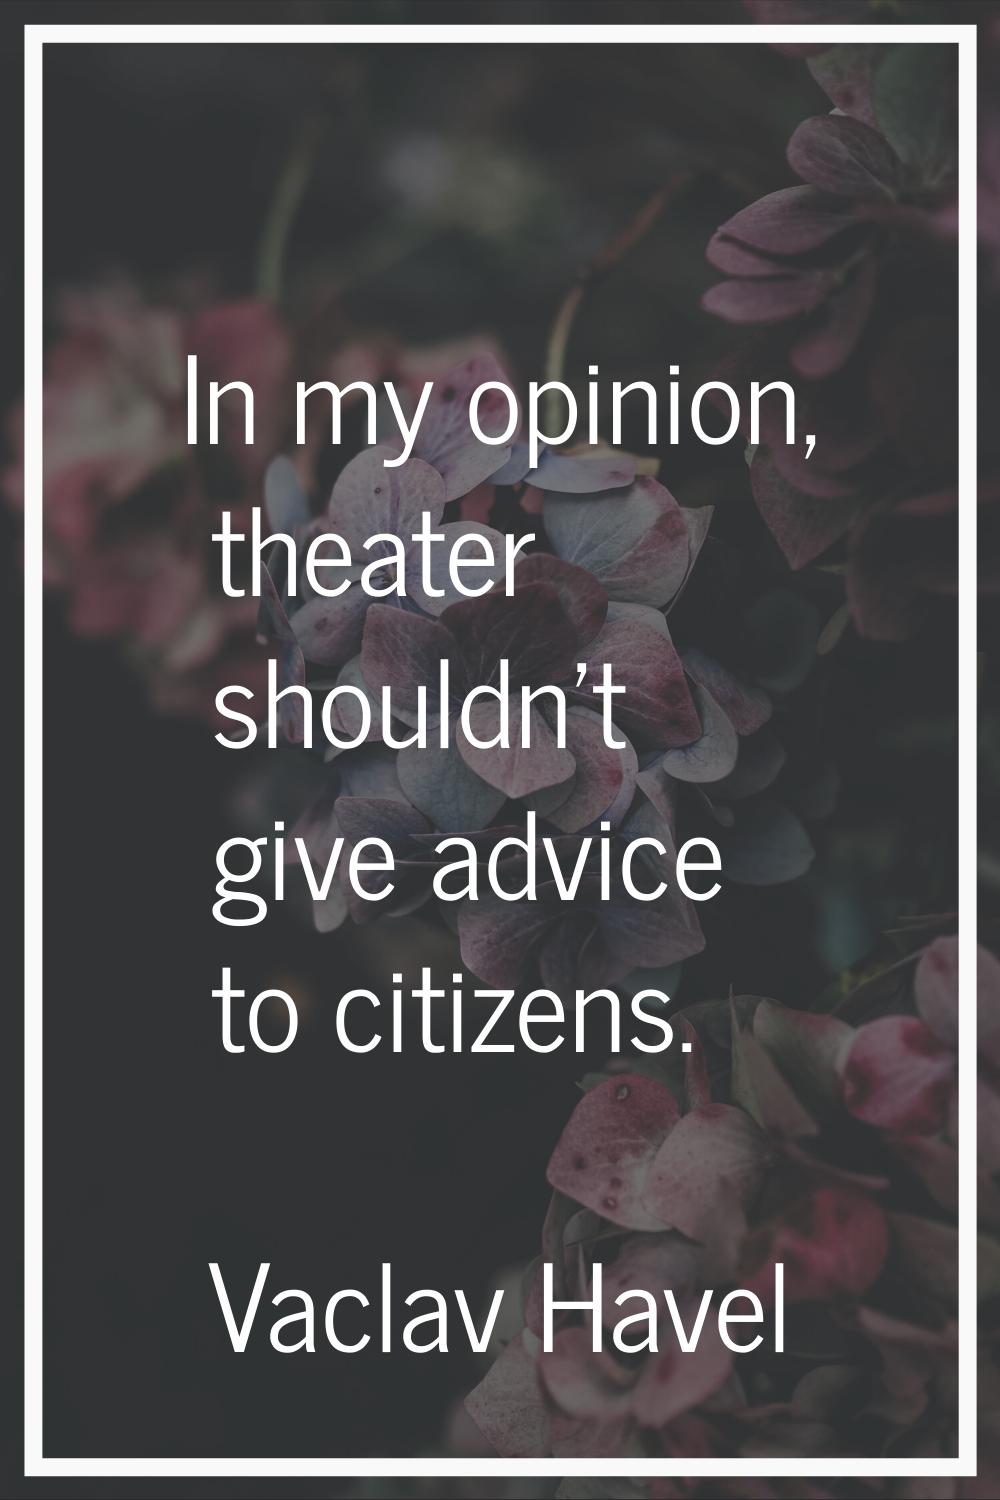 In my opinion, theater shouldn't give advice to citizens.